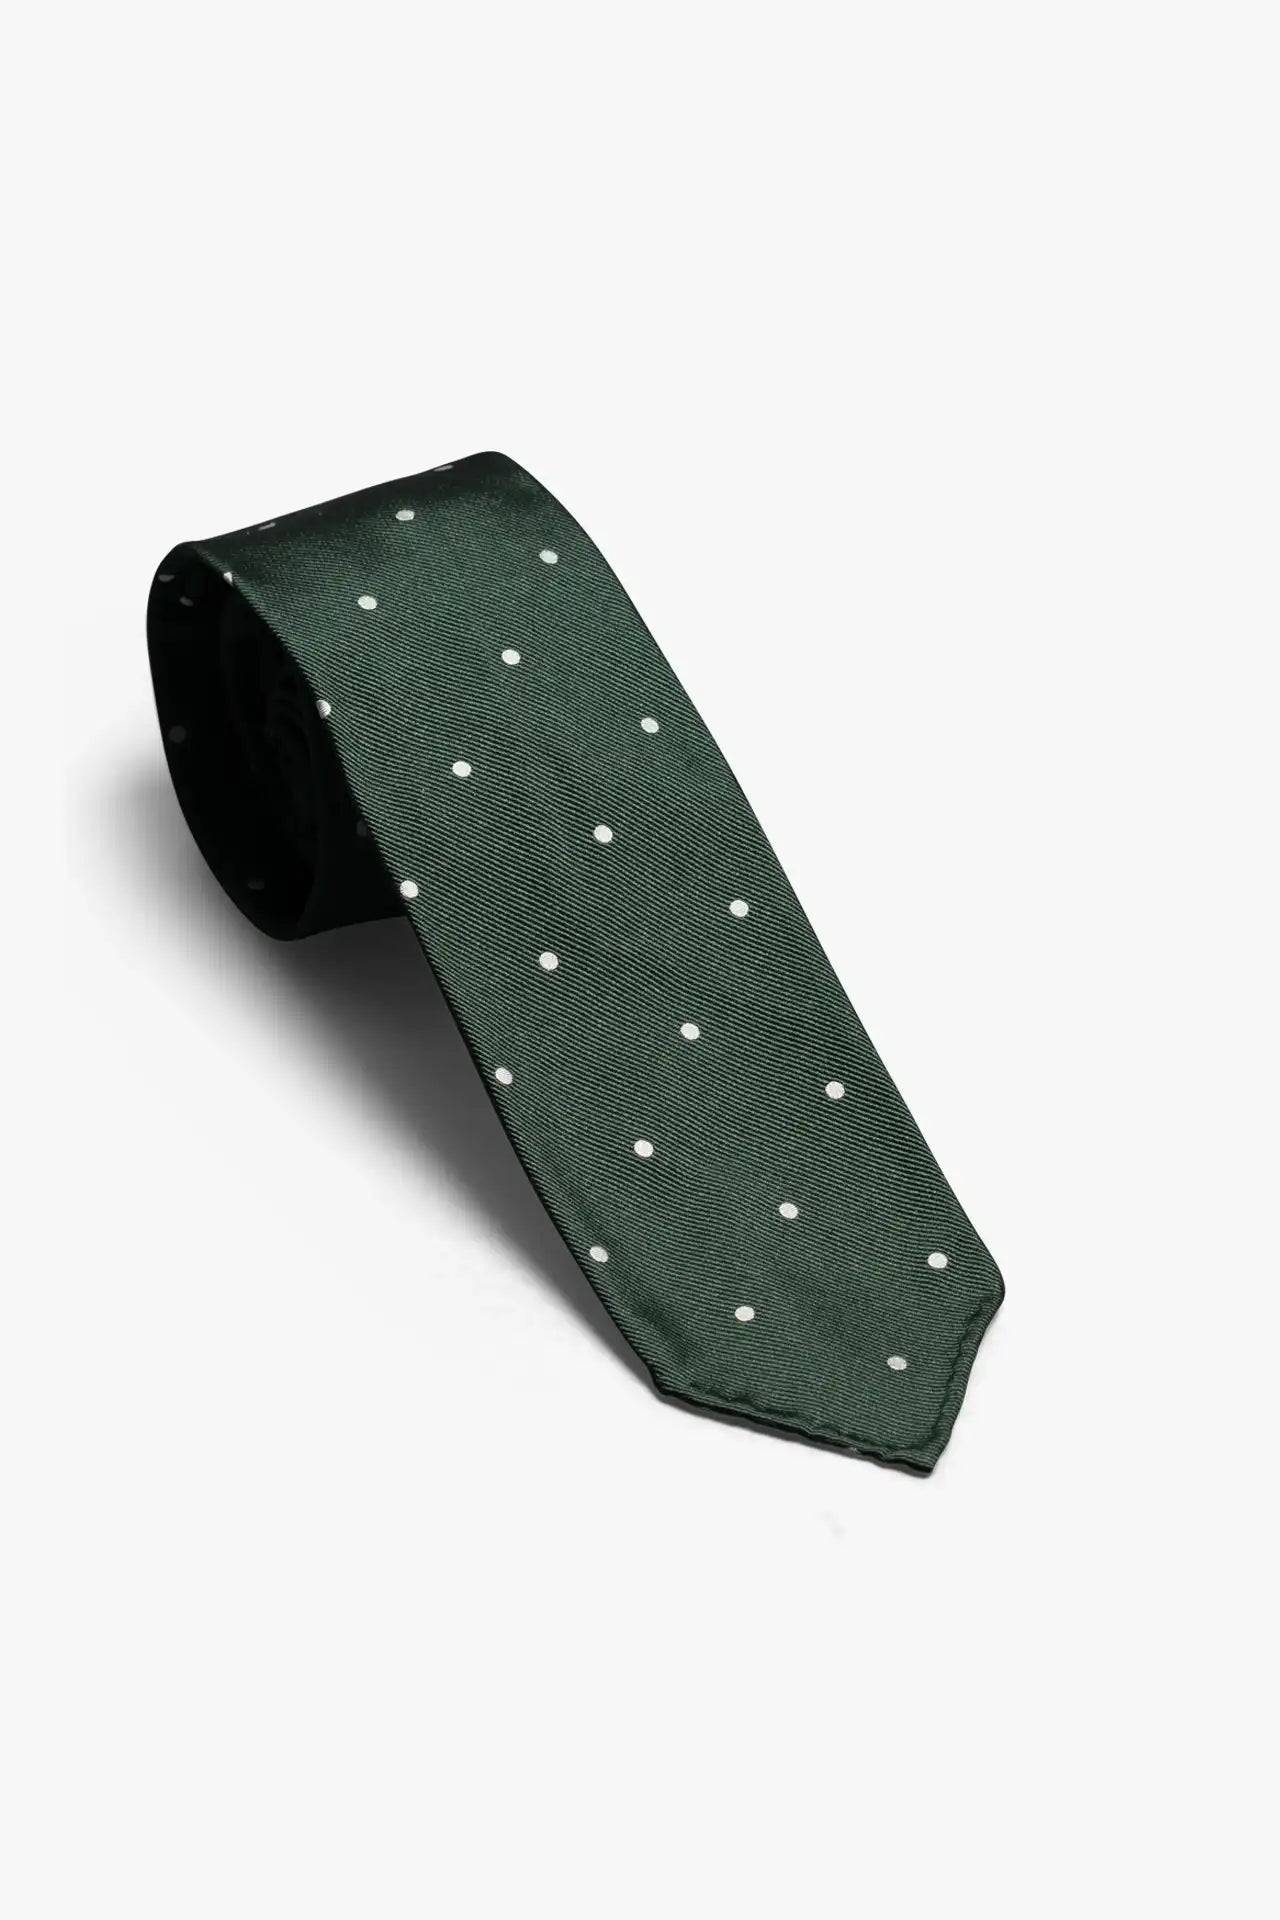 The Dotted 7 Fold - Forest Green